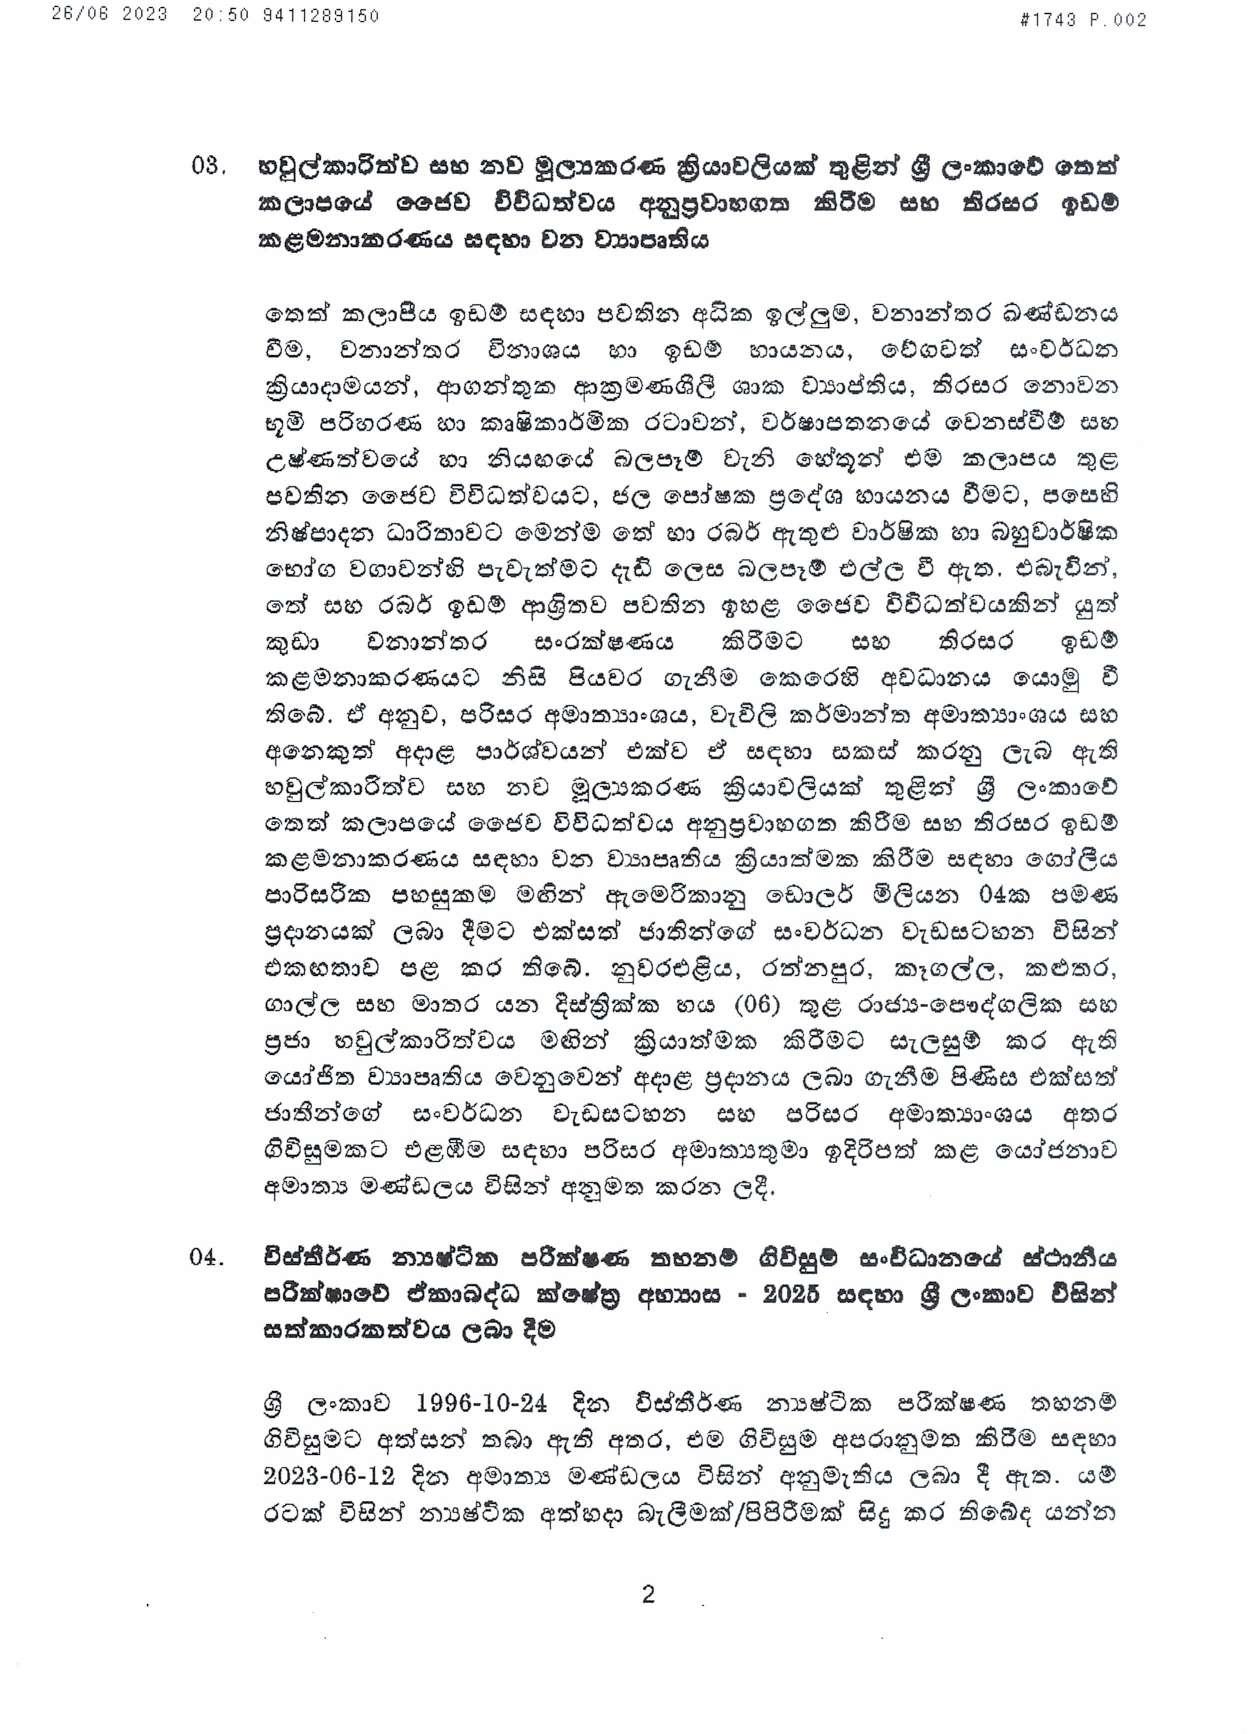 Cabinet Decision on 26.06.2023 page 002